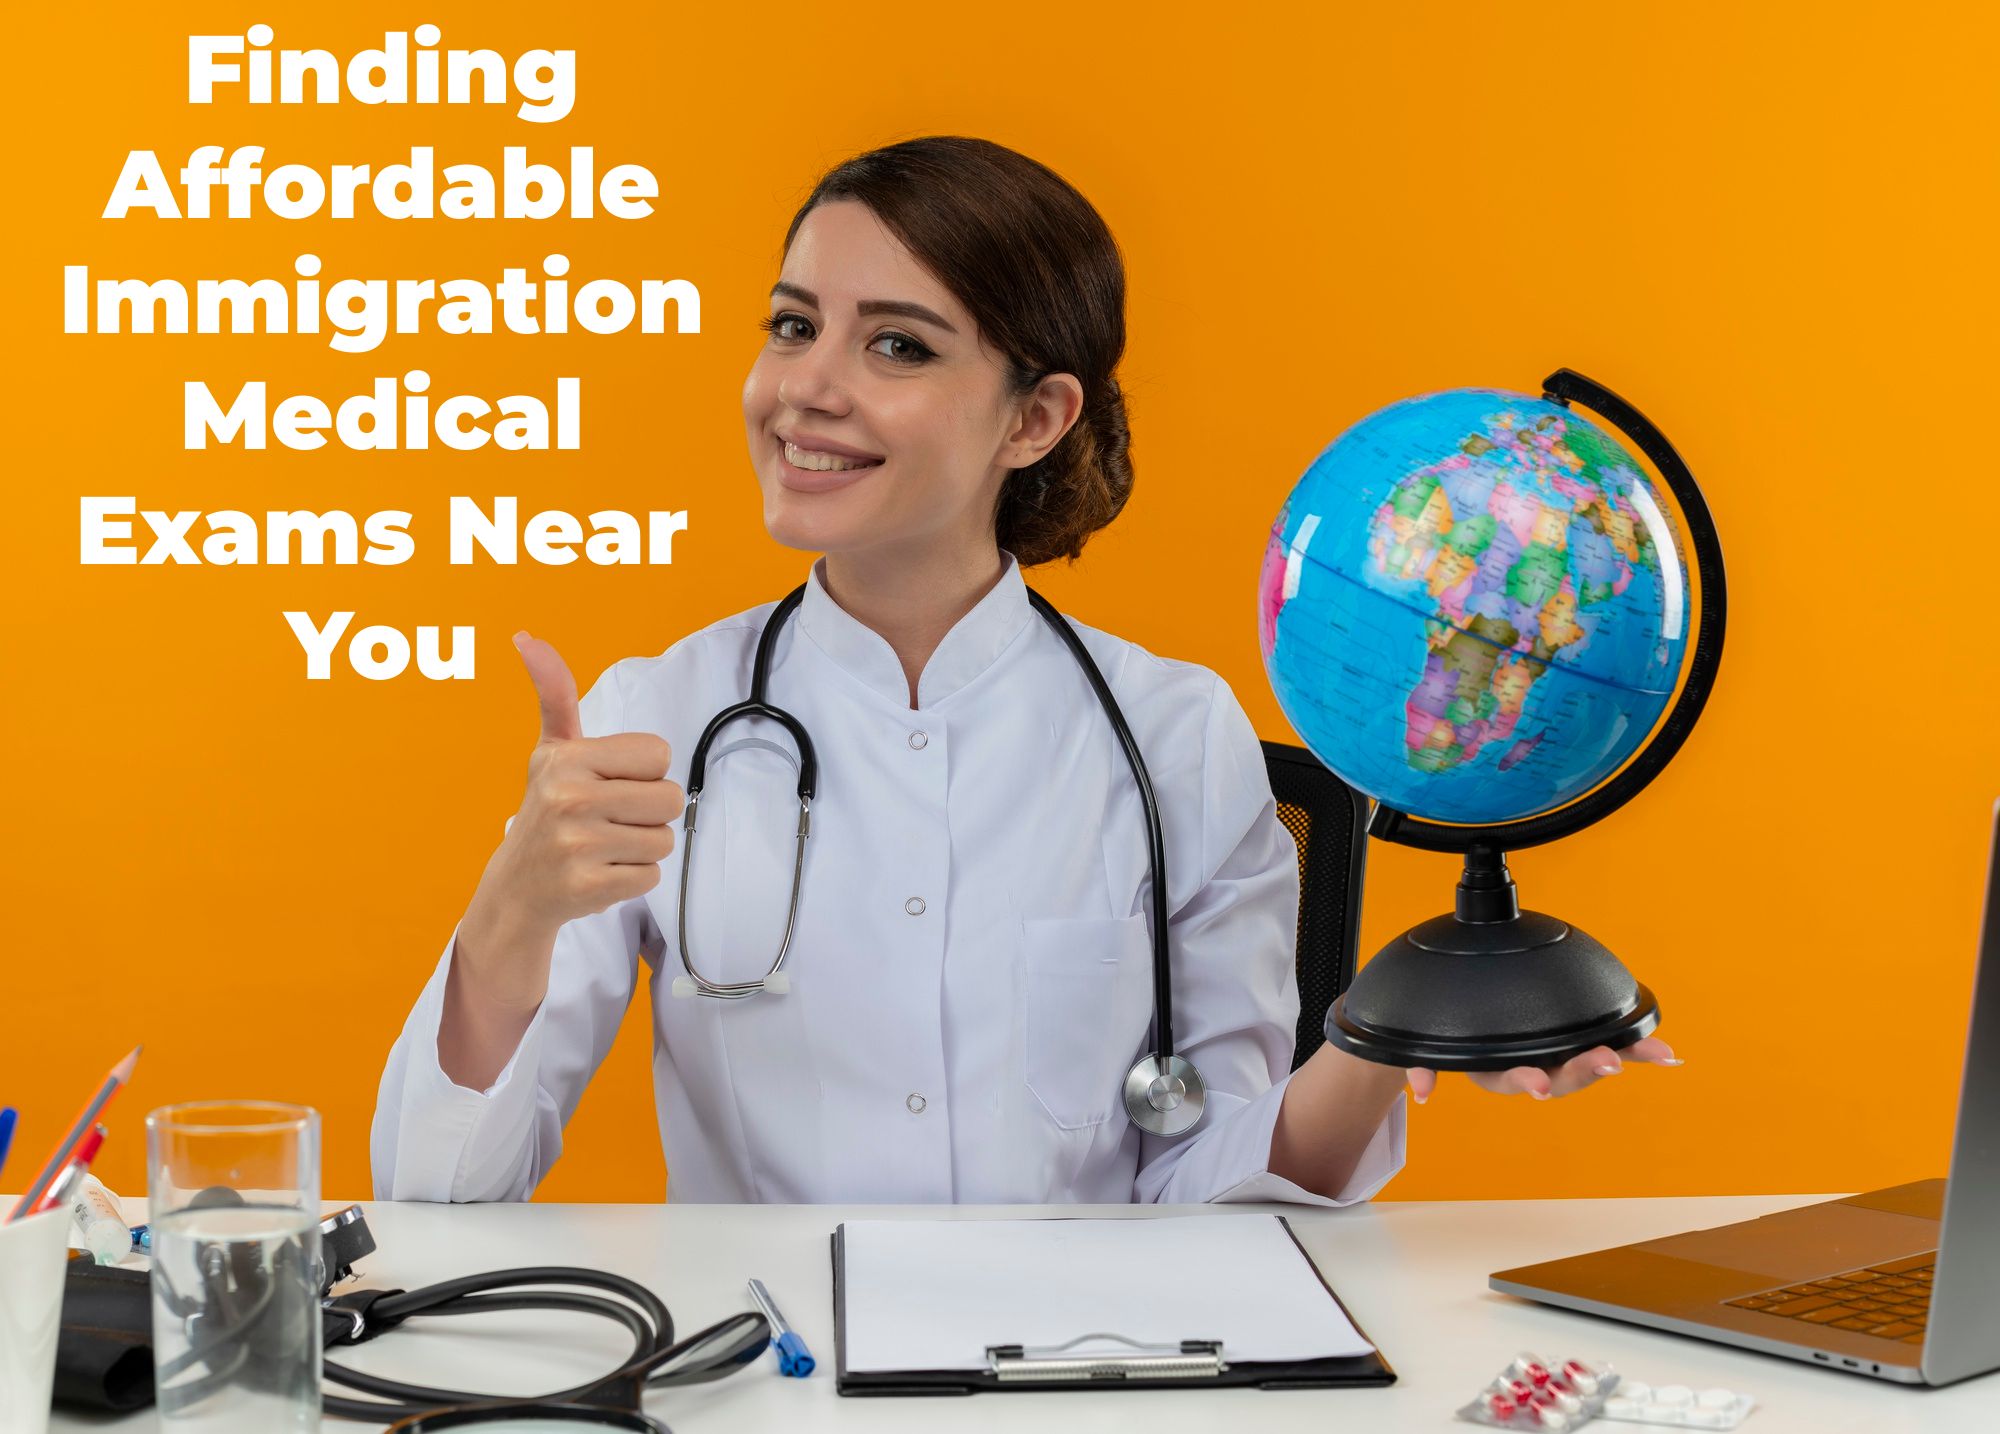 Cheap Immigration Medical Exams Near You